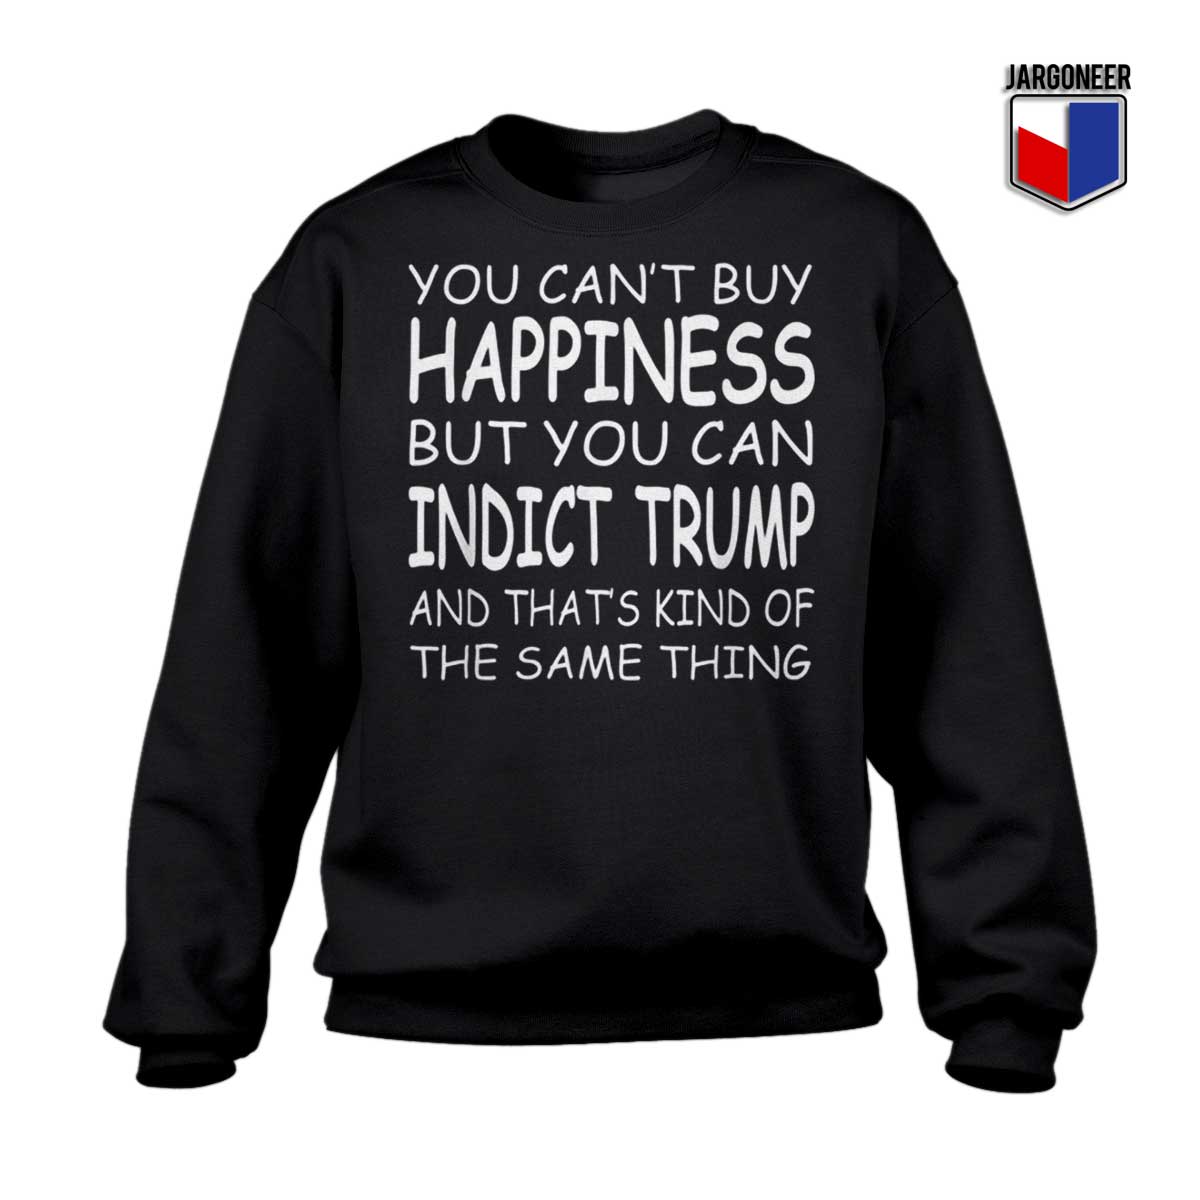 You Cant Buy Happiness Sweatshirt - Shop Unique Graphic Cool Shirt Designs